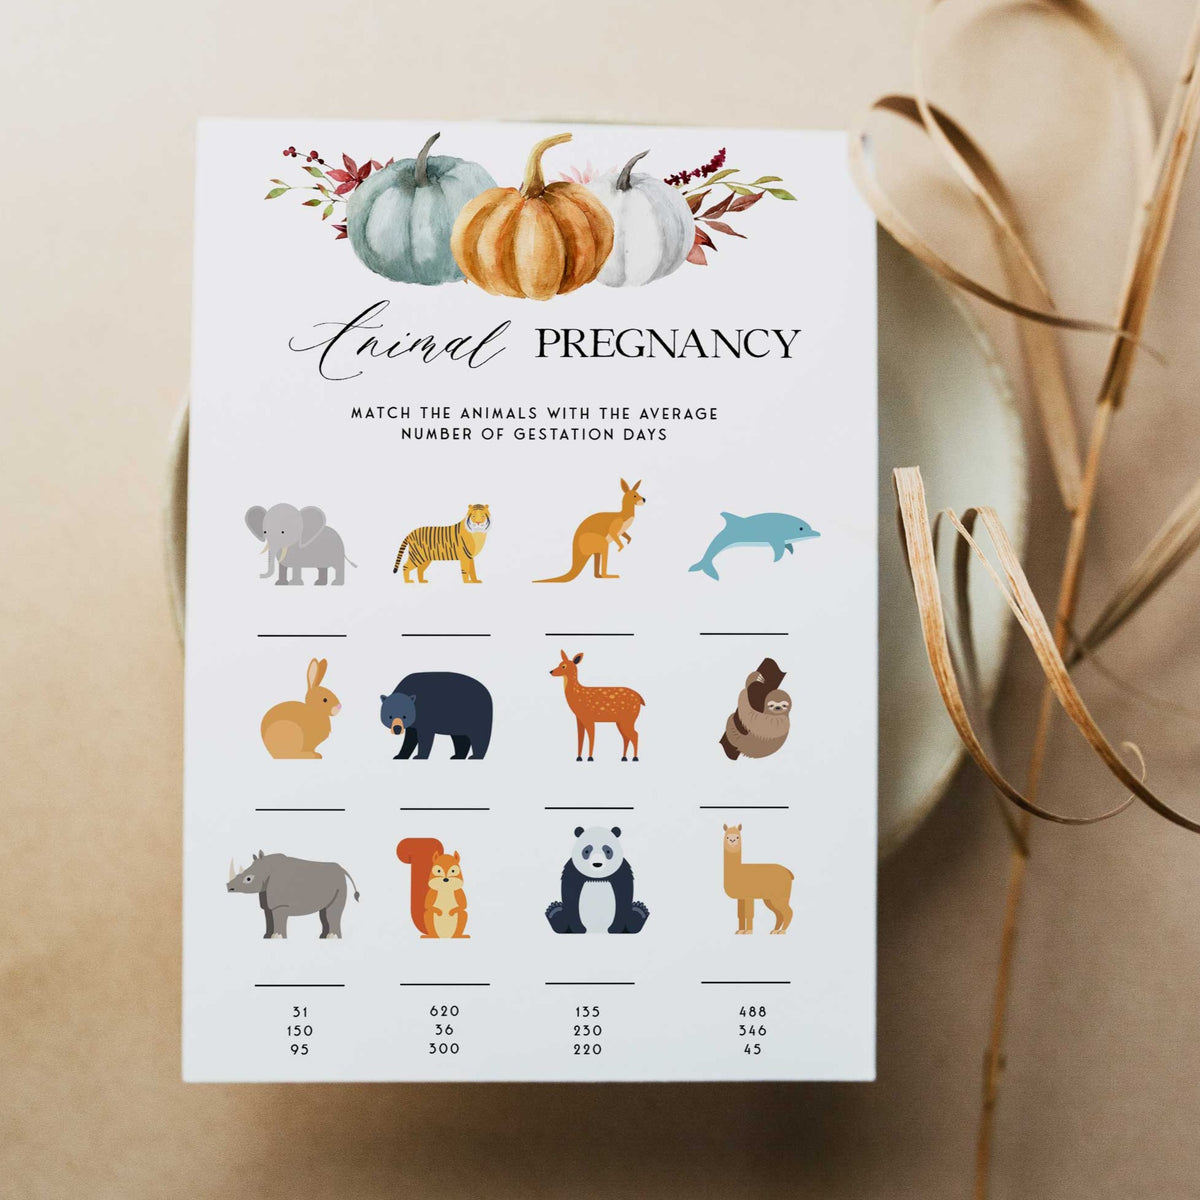 Fully editable and printable baby shower animal pregnancy game with a fall pumpkin design. Perfect for a Fall Pumpkin baby shower themed party